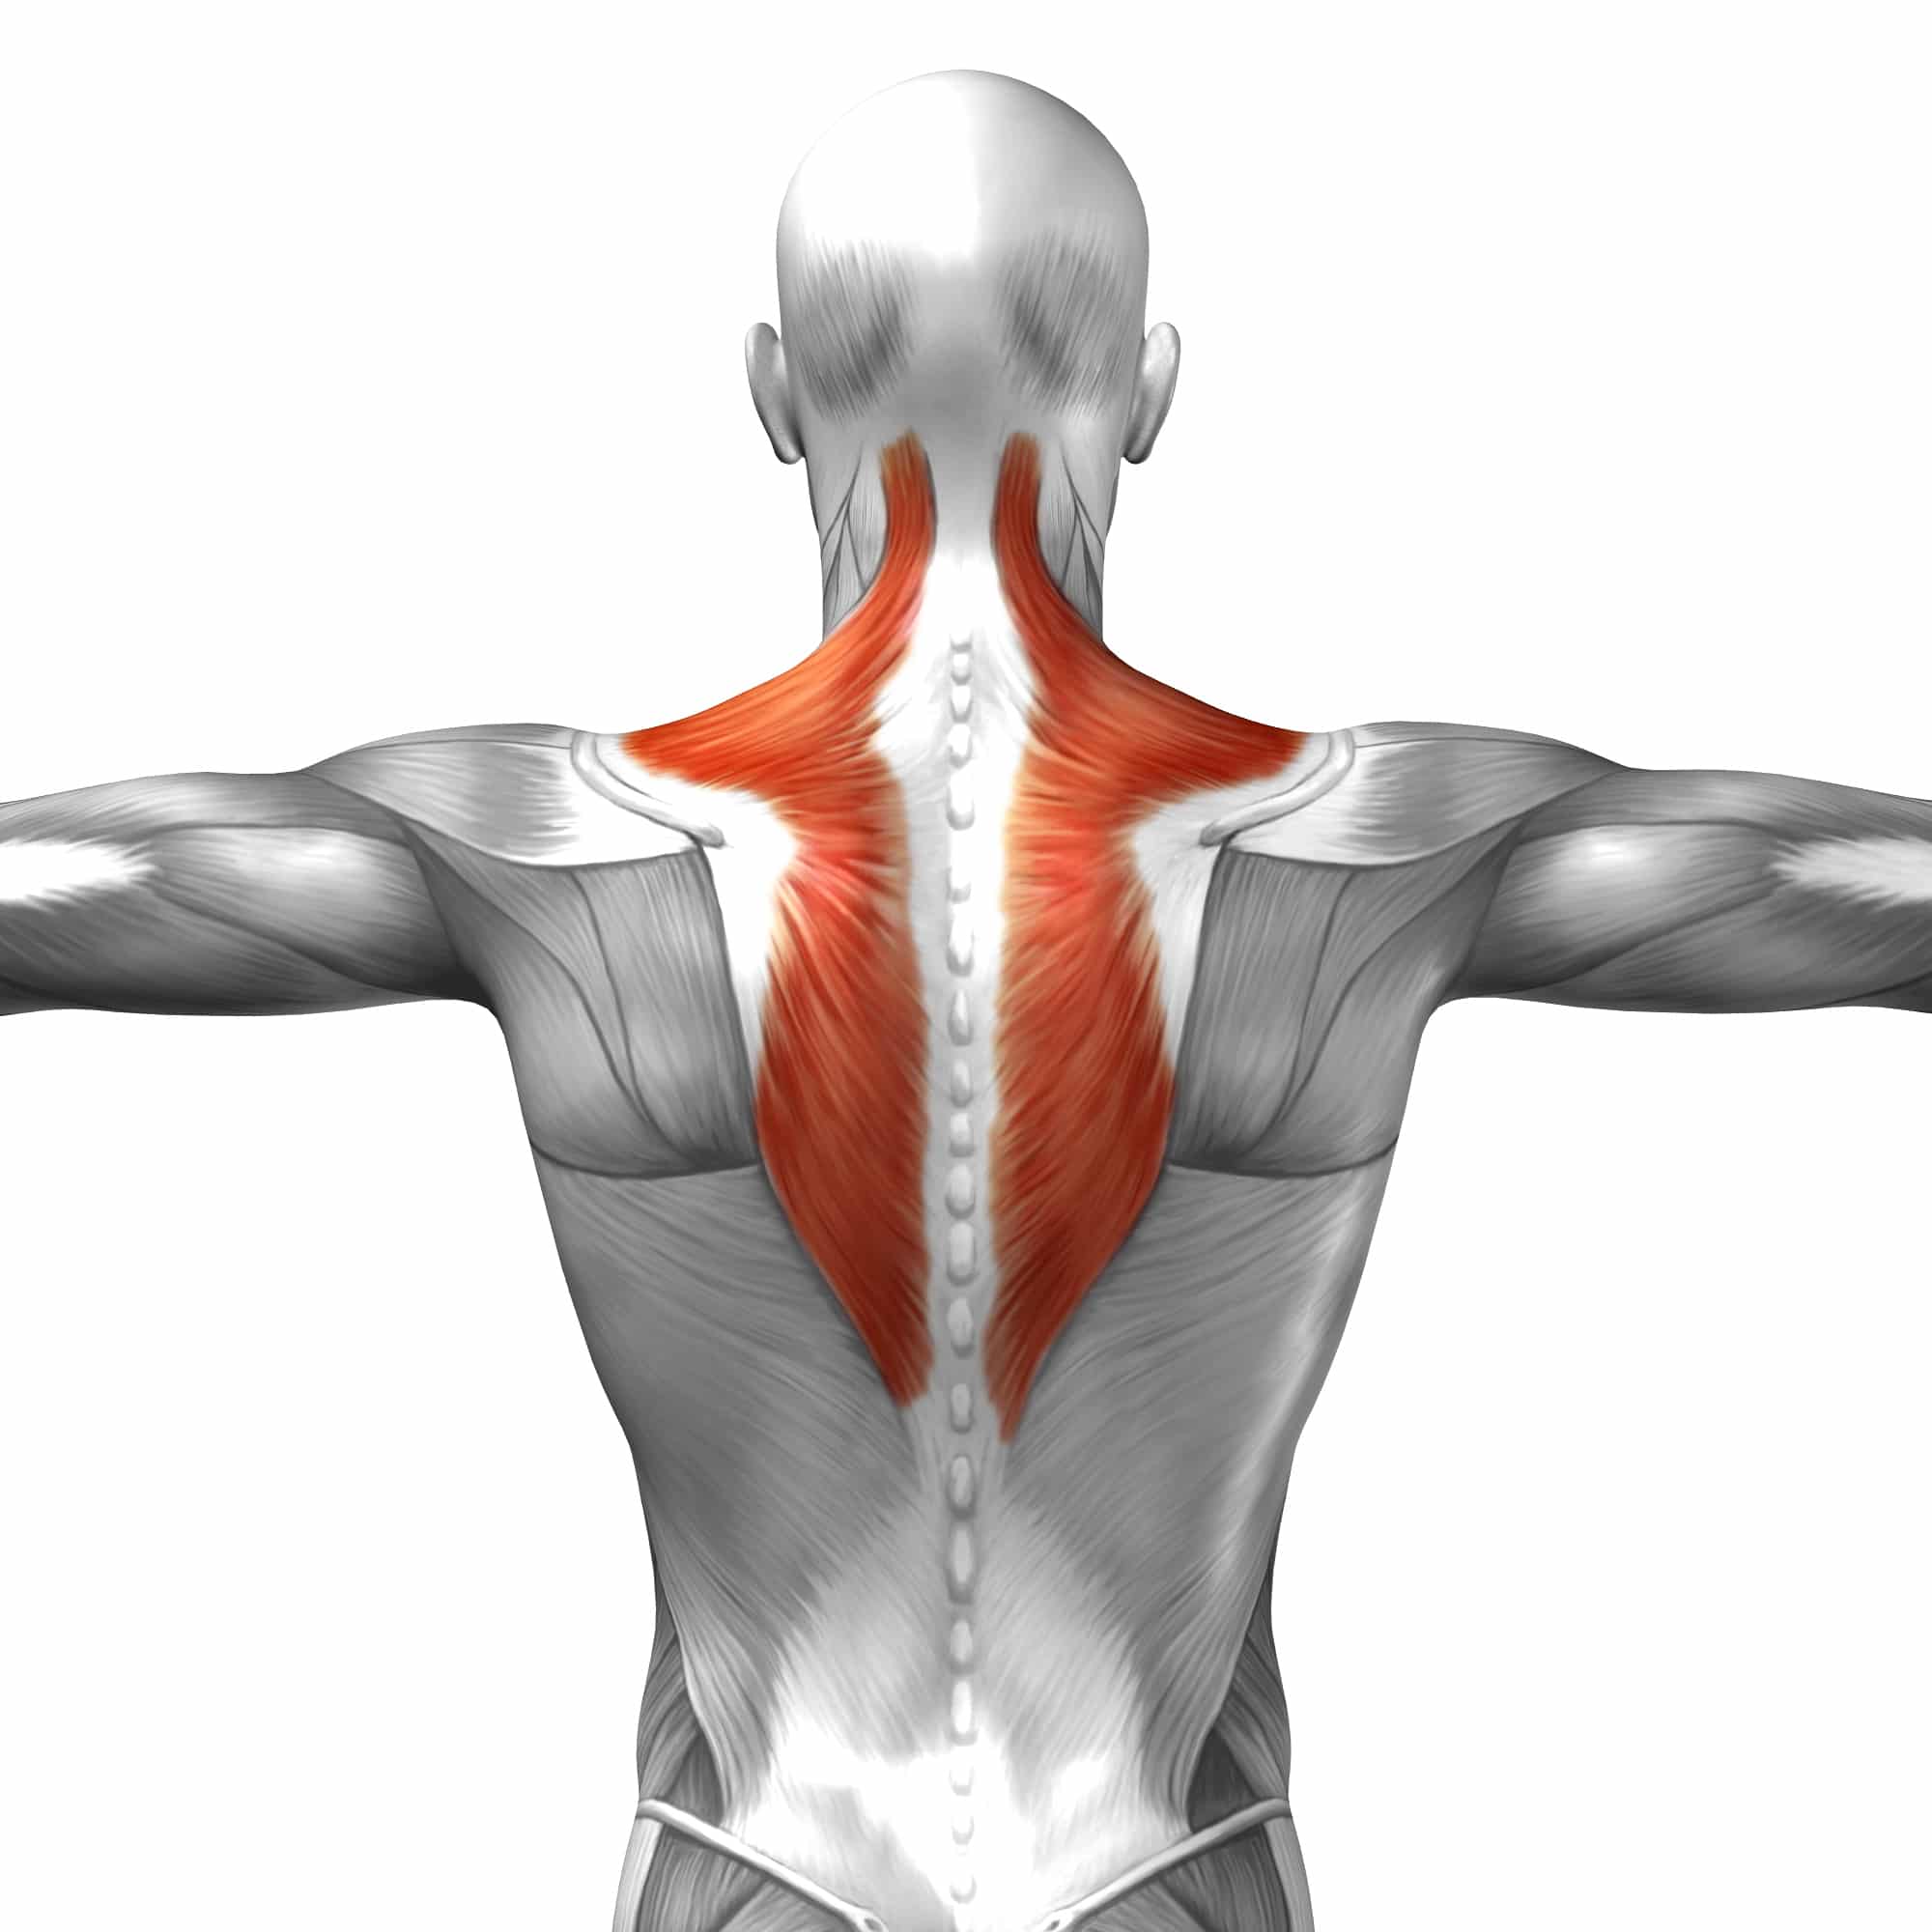 Muscle Strain of the Upper Back